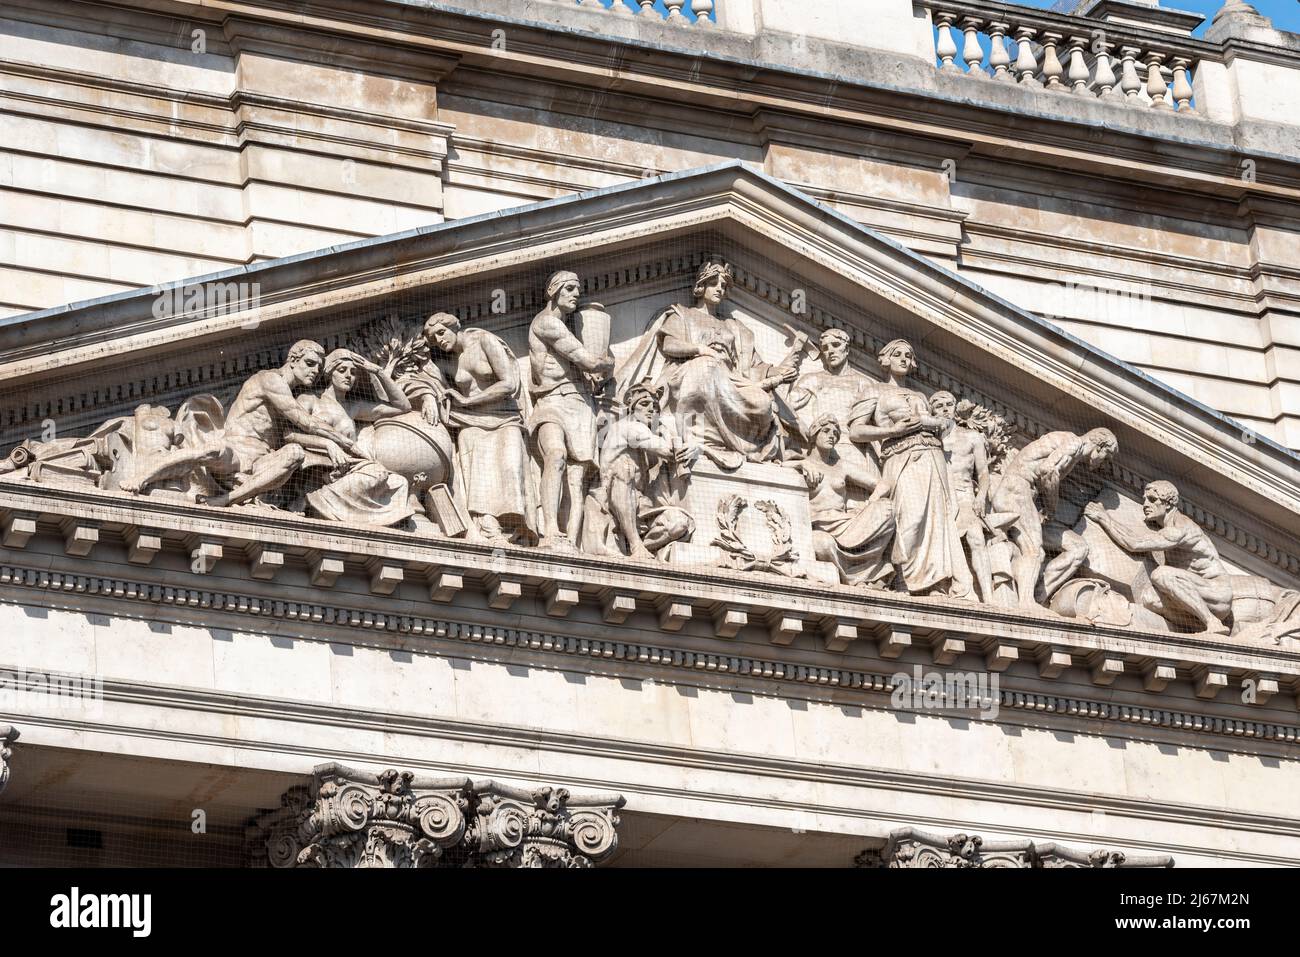 Architectural details on 100 Parliament Street (100PS), of Government Offices Great George Street in Westminster, London, UK. Pedimental Sculpture Stock Photo